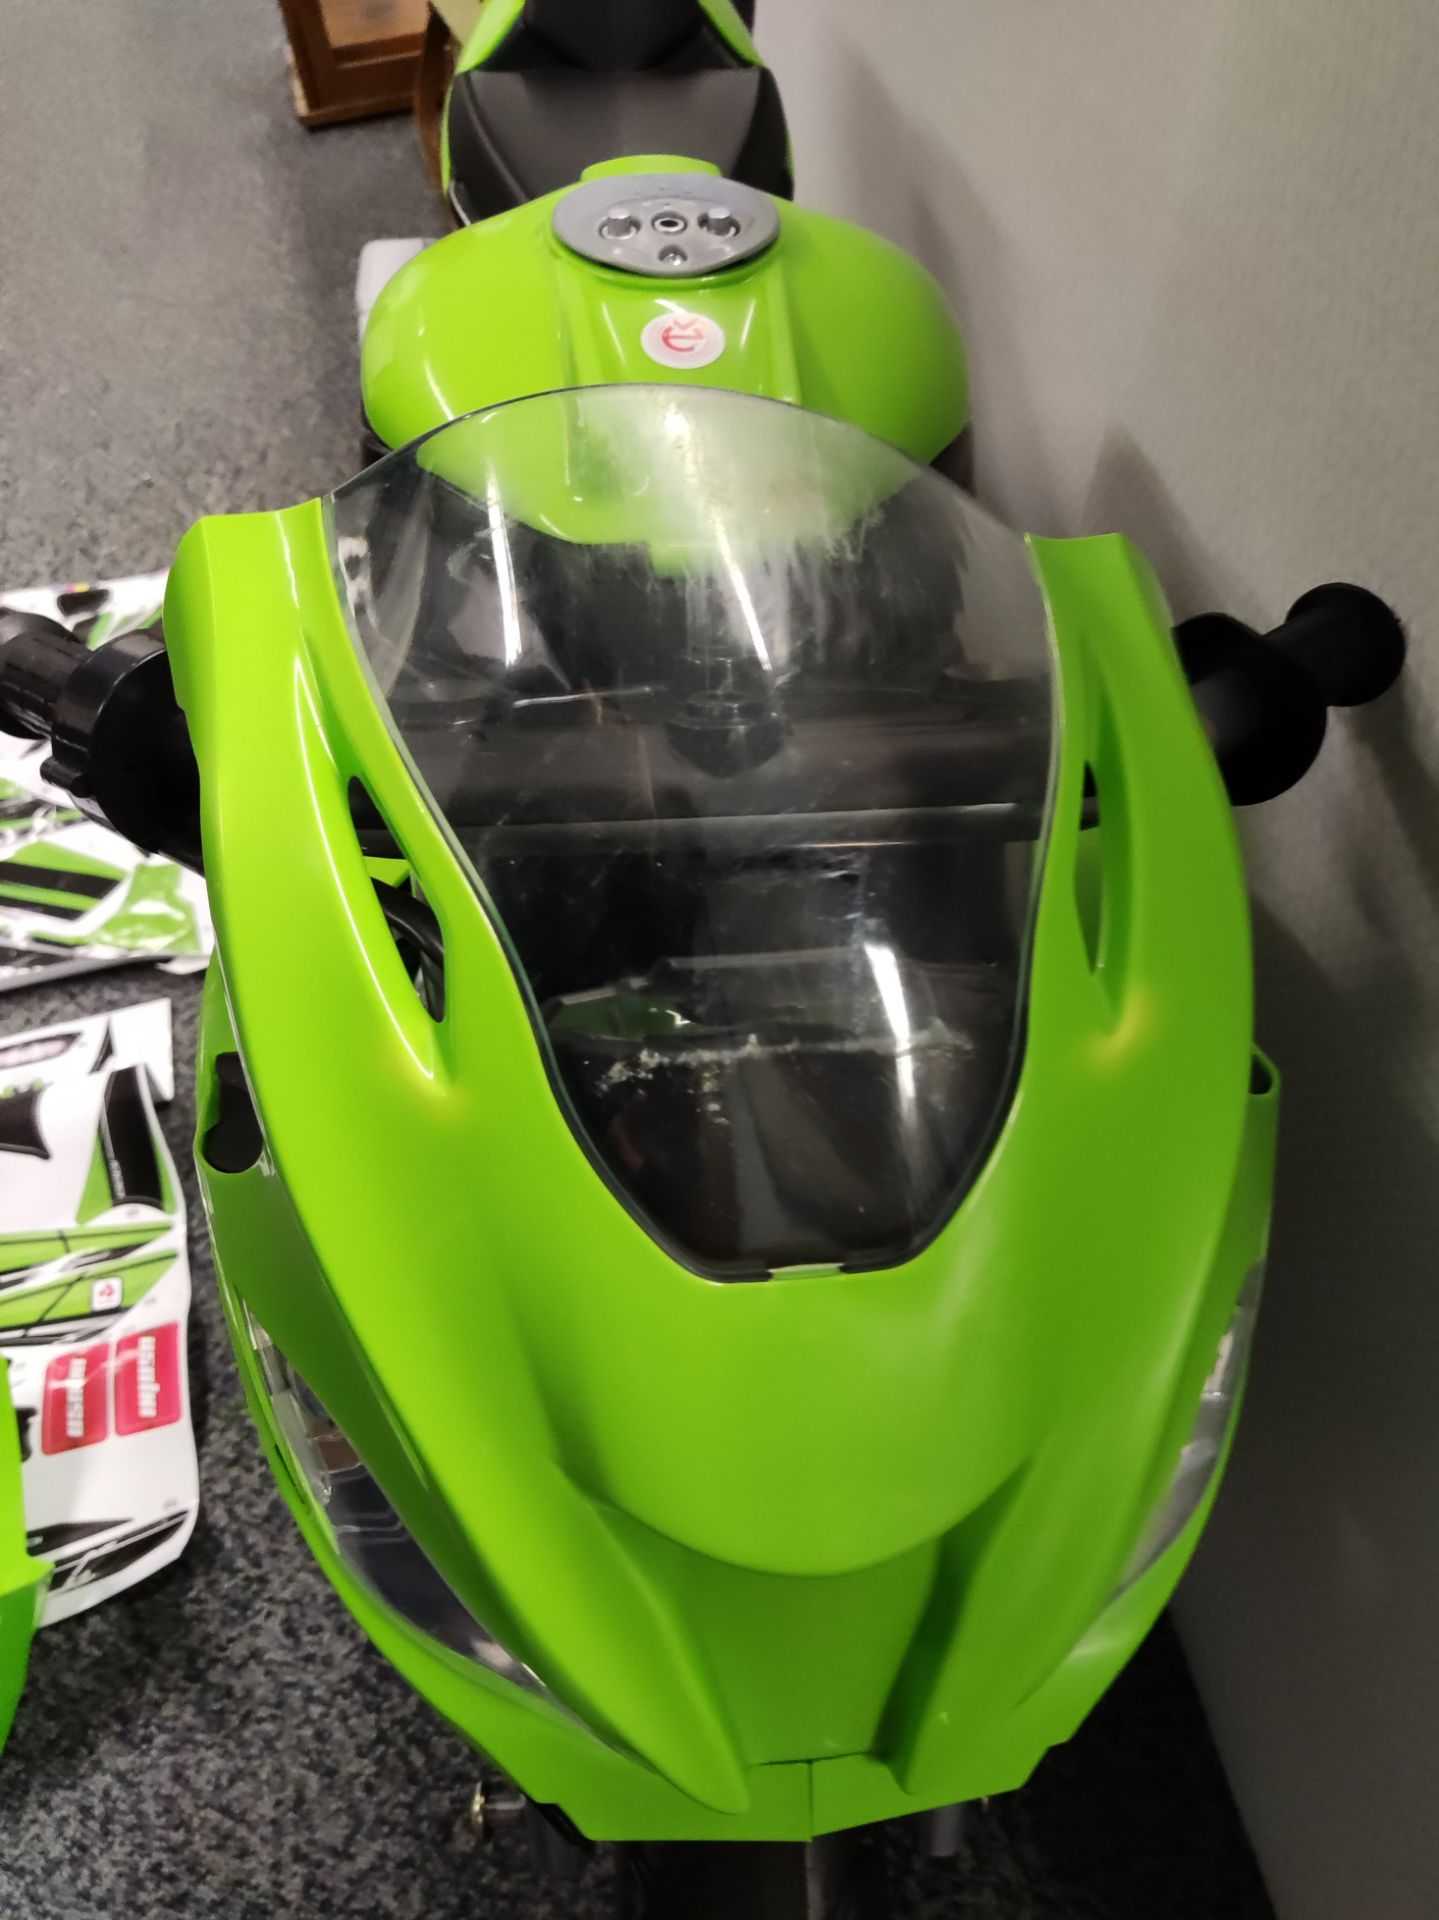 1 x Injusa Kids Electric Ride On Kawasaki ZX10 12V Motorcycle - 6495 - HTYS174 - CL987 - Location: - Image 20 of 24